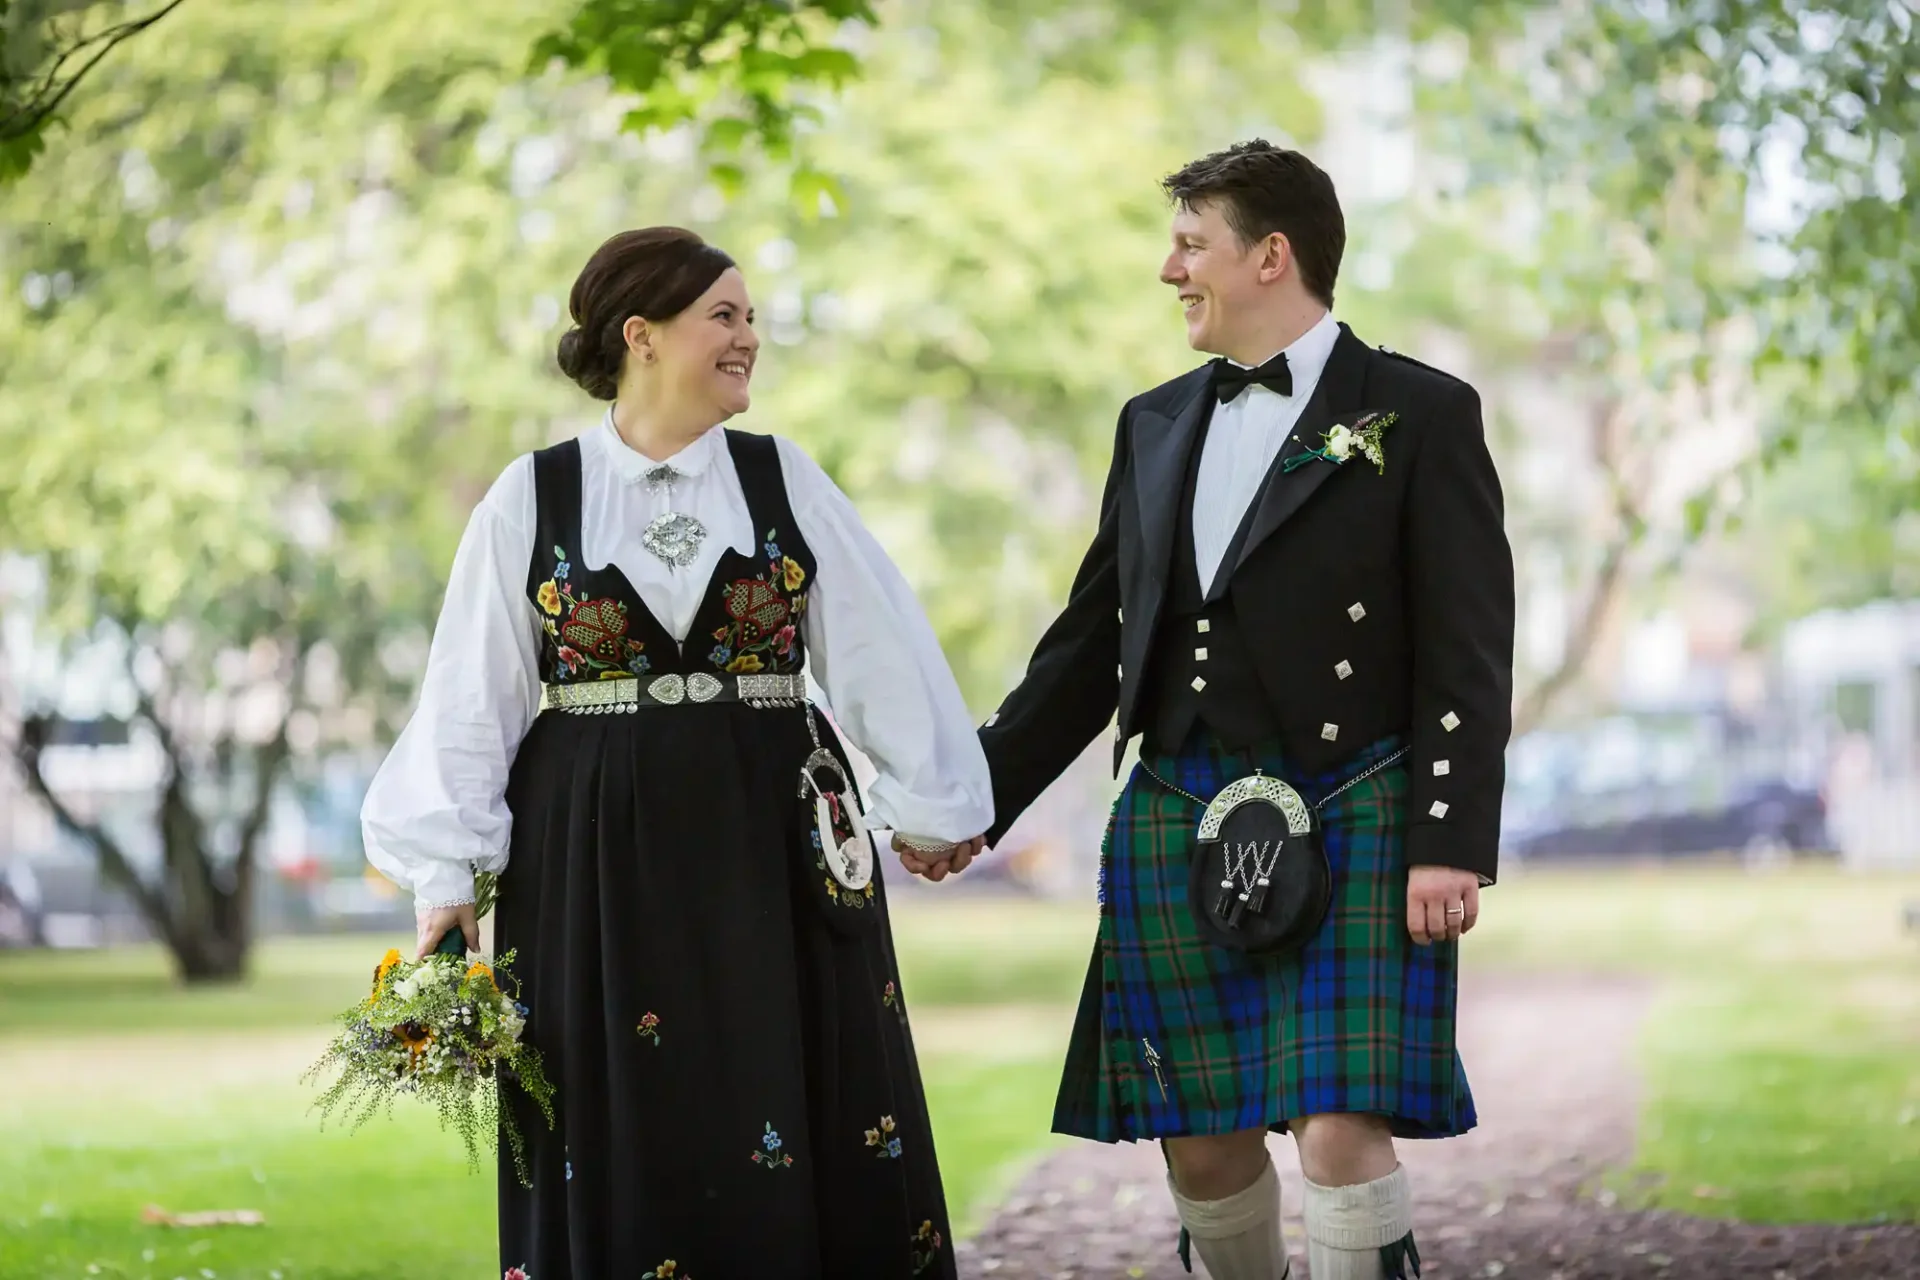 A bride in a traditional norwegian dress and a groom in a scottish kilt, holding hands and smiling at each other in a park.